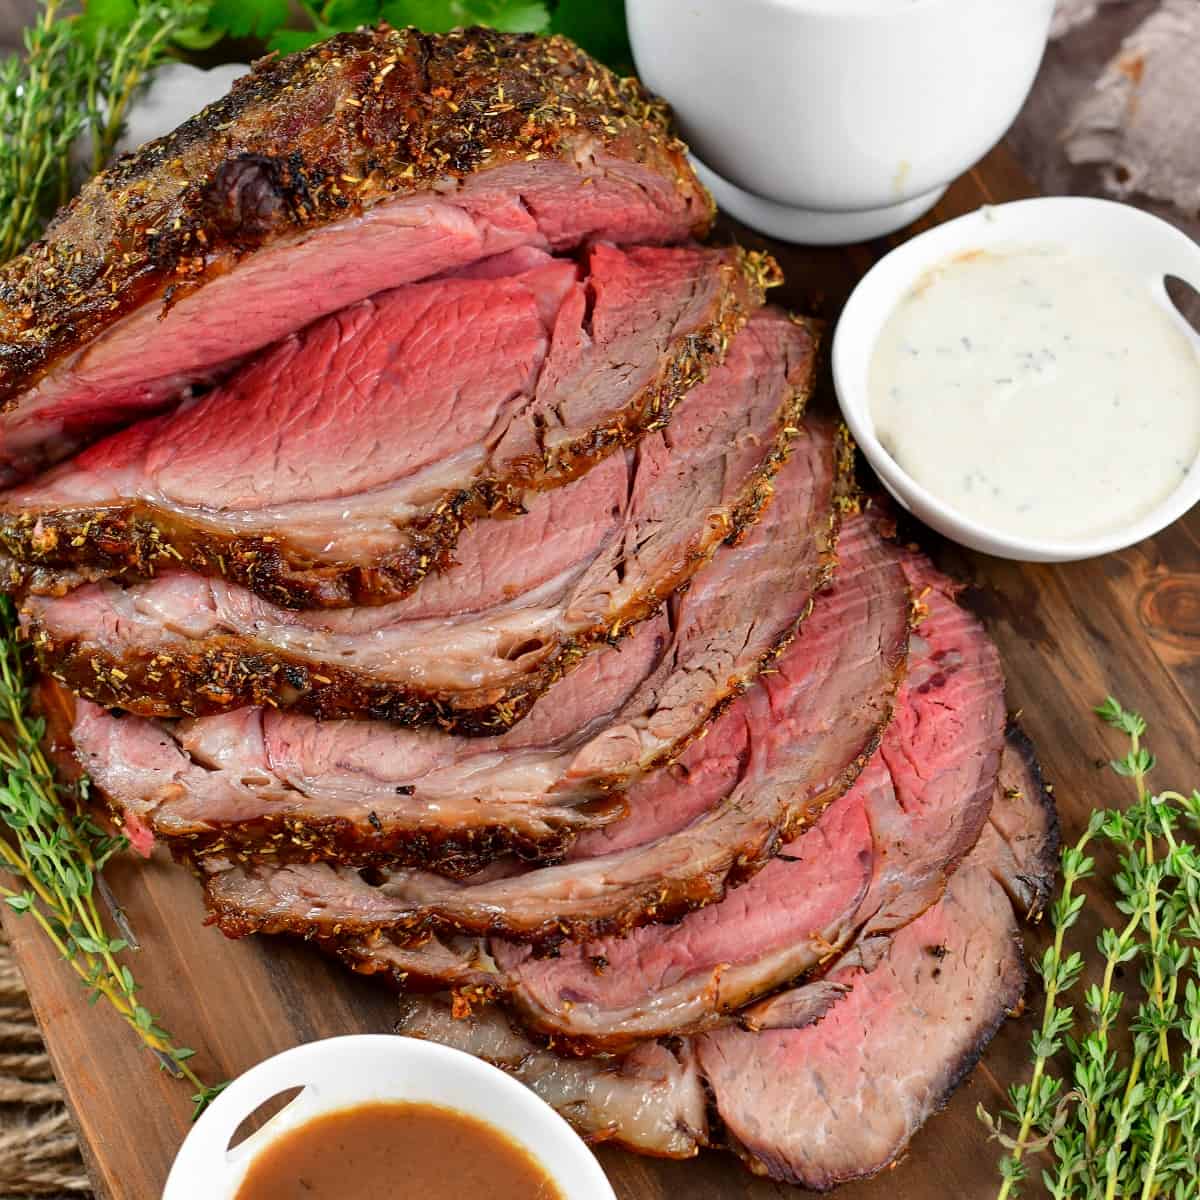 https://www.willcookforsmiles.com/wp-content/uploads/2022/12/Prime-Rib-cooked-top-crop-square.jpg